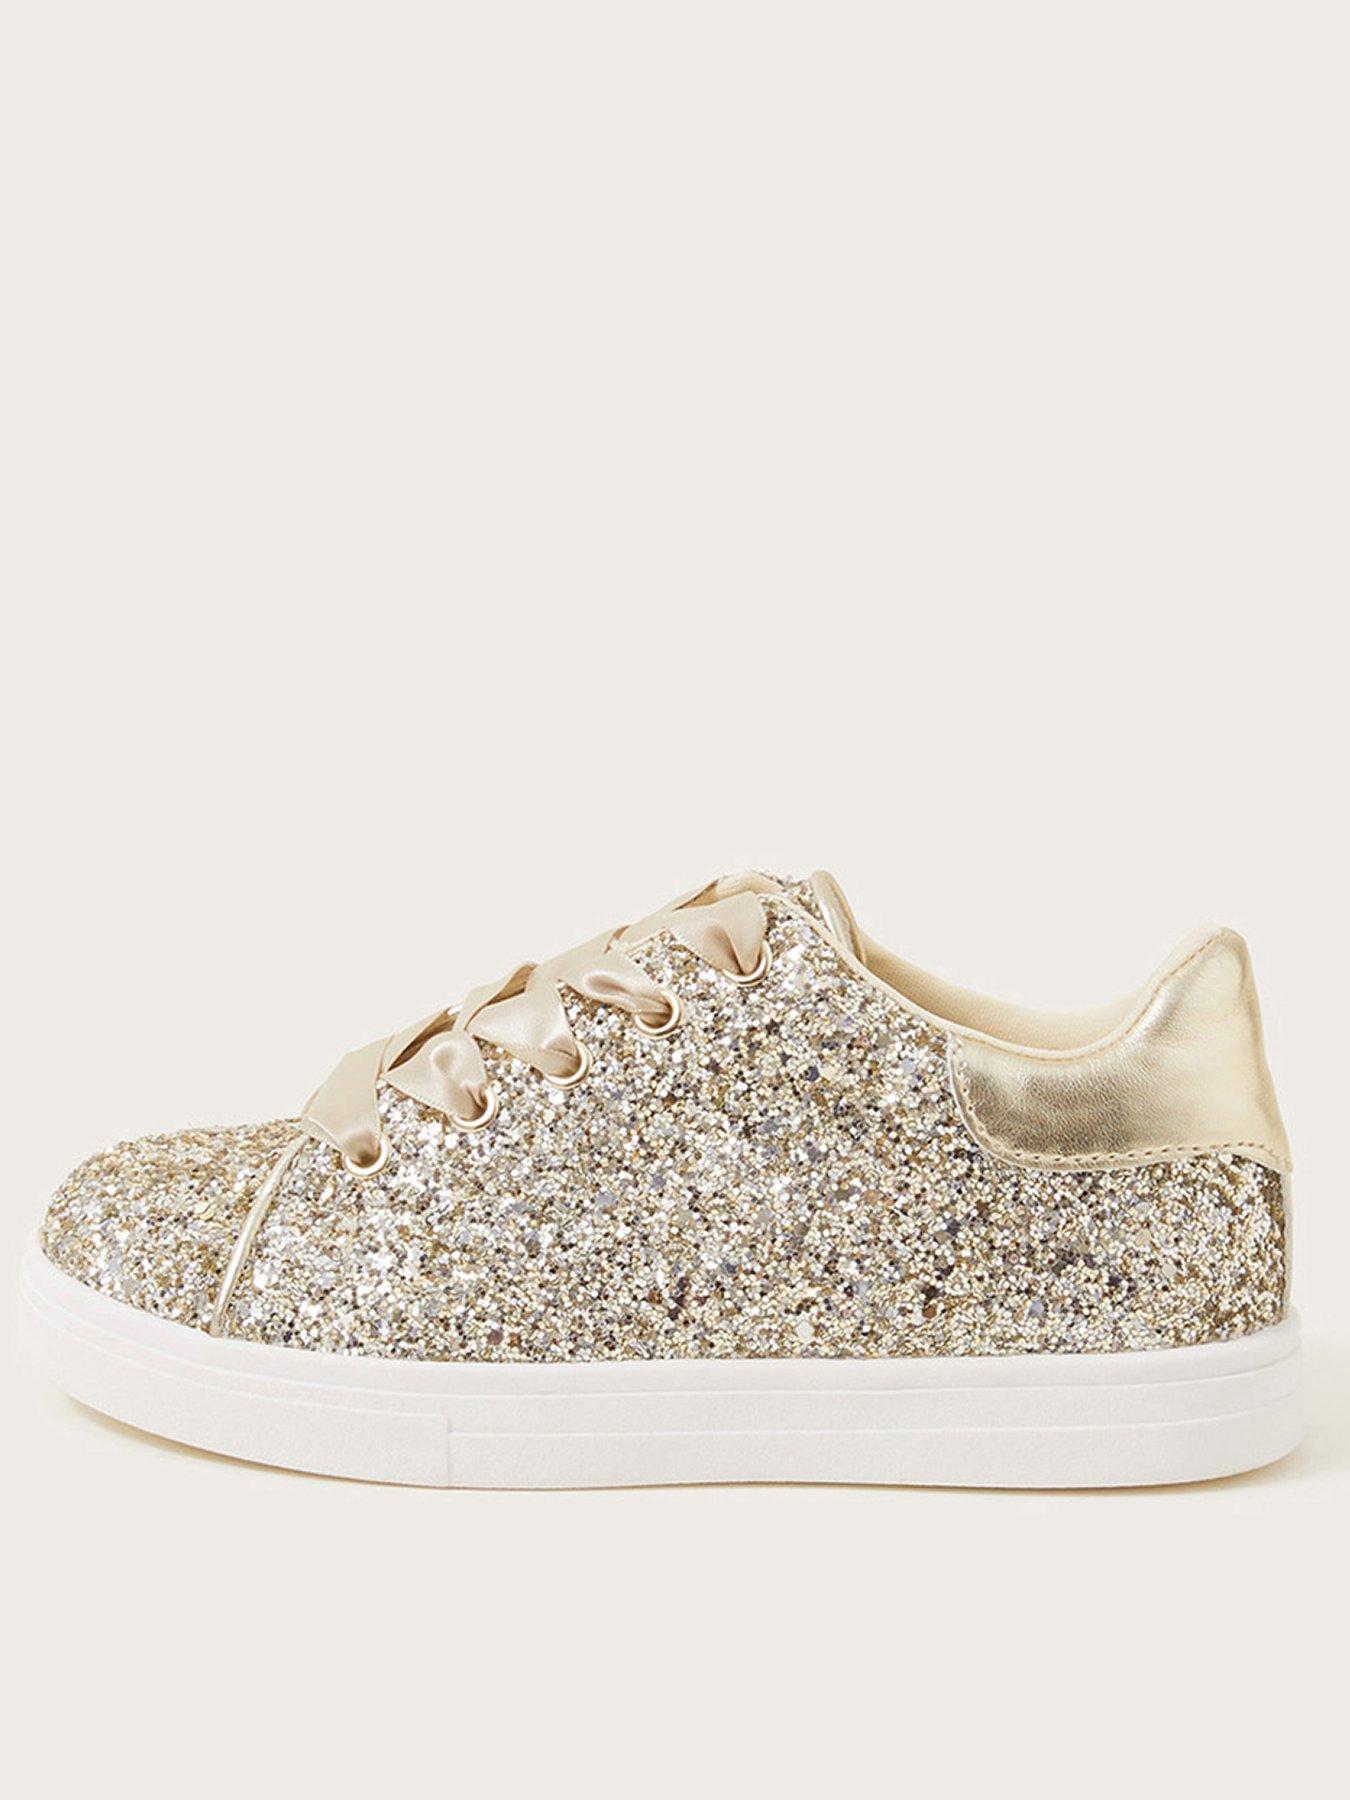 Very G Light Up My World Sparkly Sneakers in Gray 8